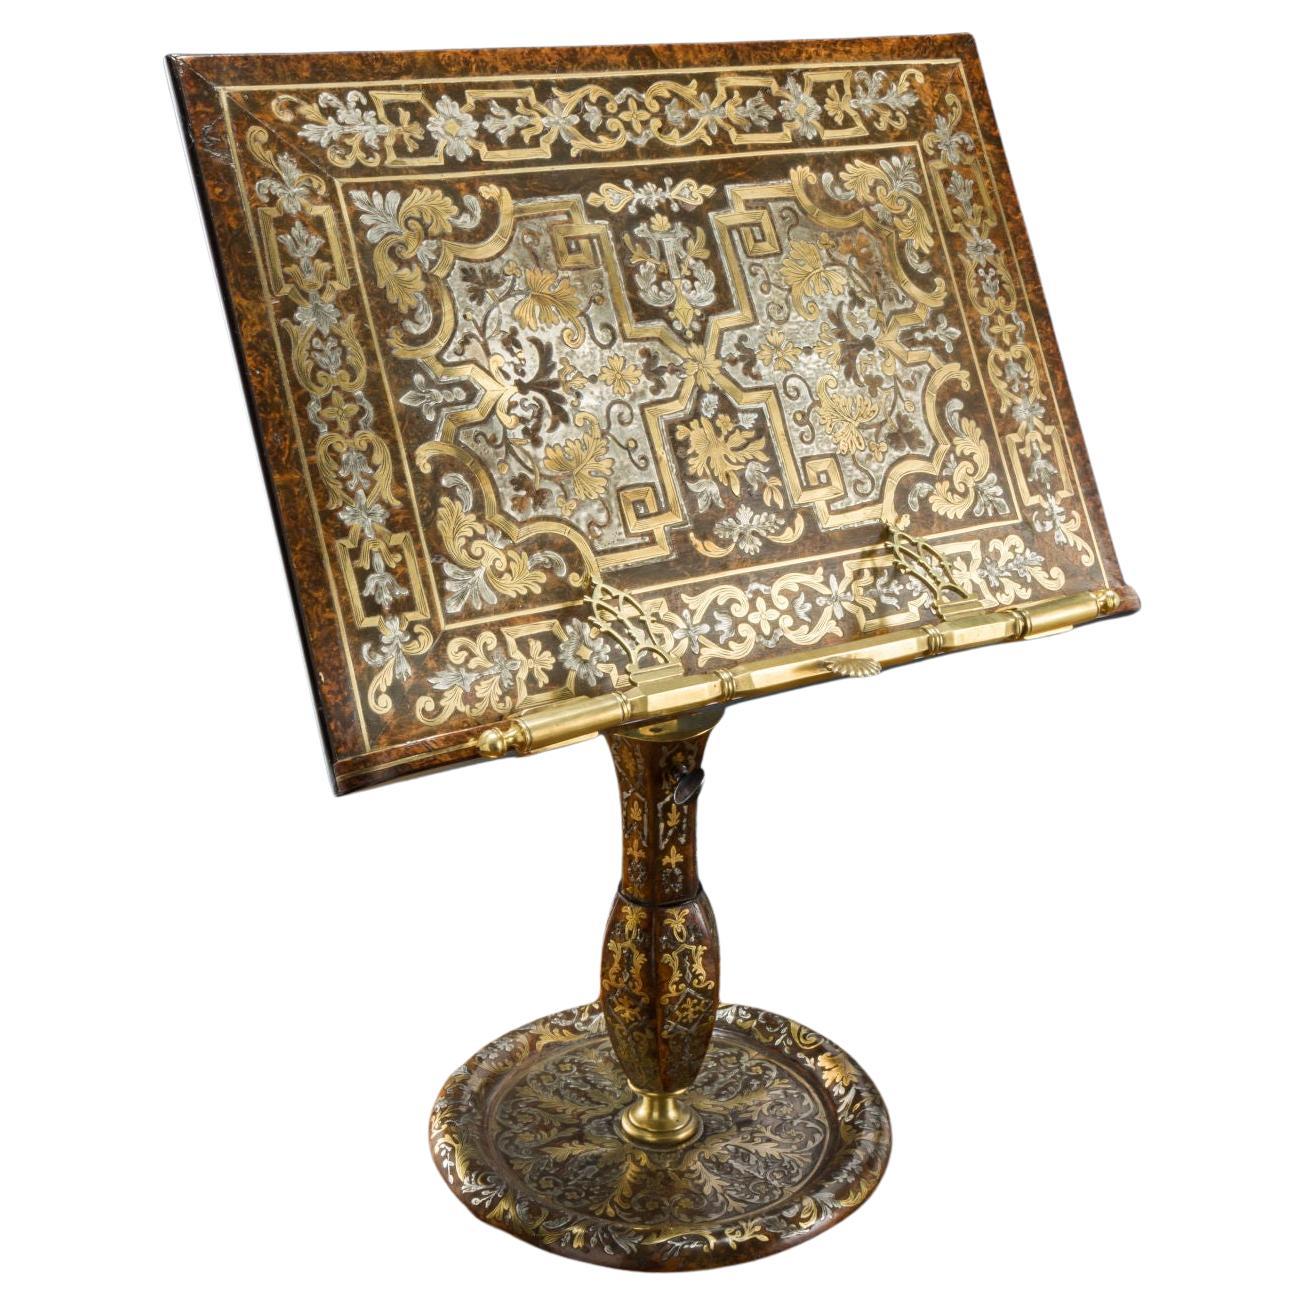 Tabletop lectern. Early 18th Century